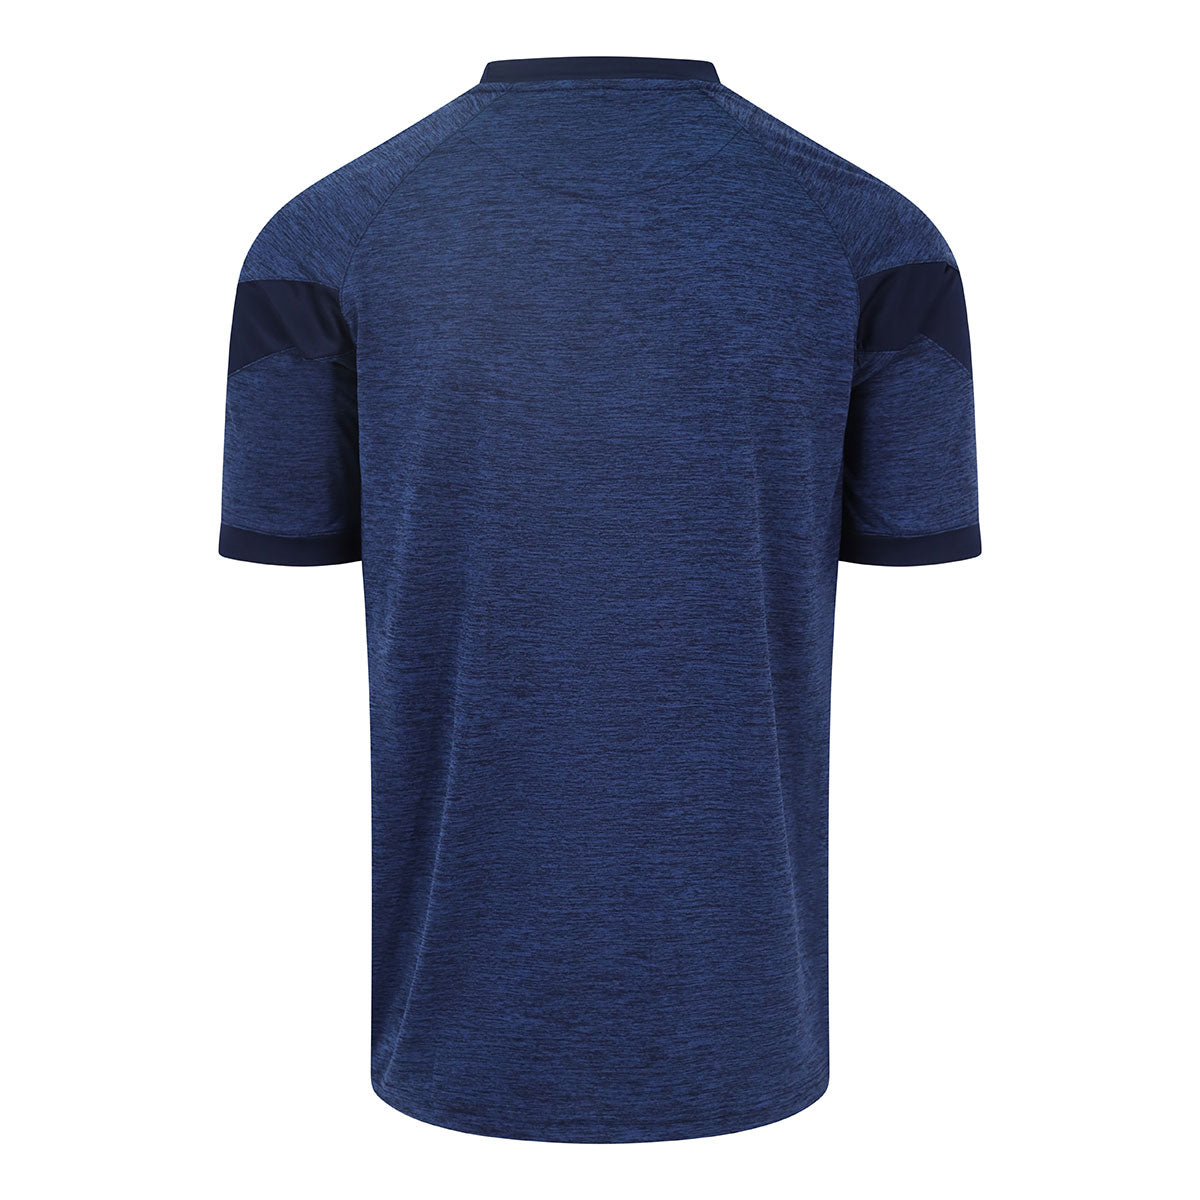 Mc Keever CLG Ghaoth Dobhair Core 22 T-Shirt - Youth - Navy